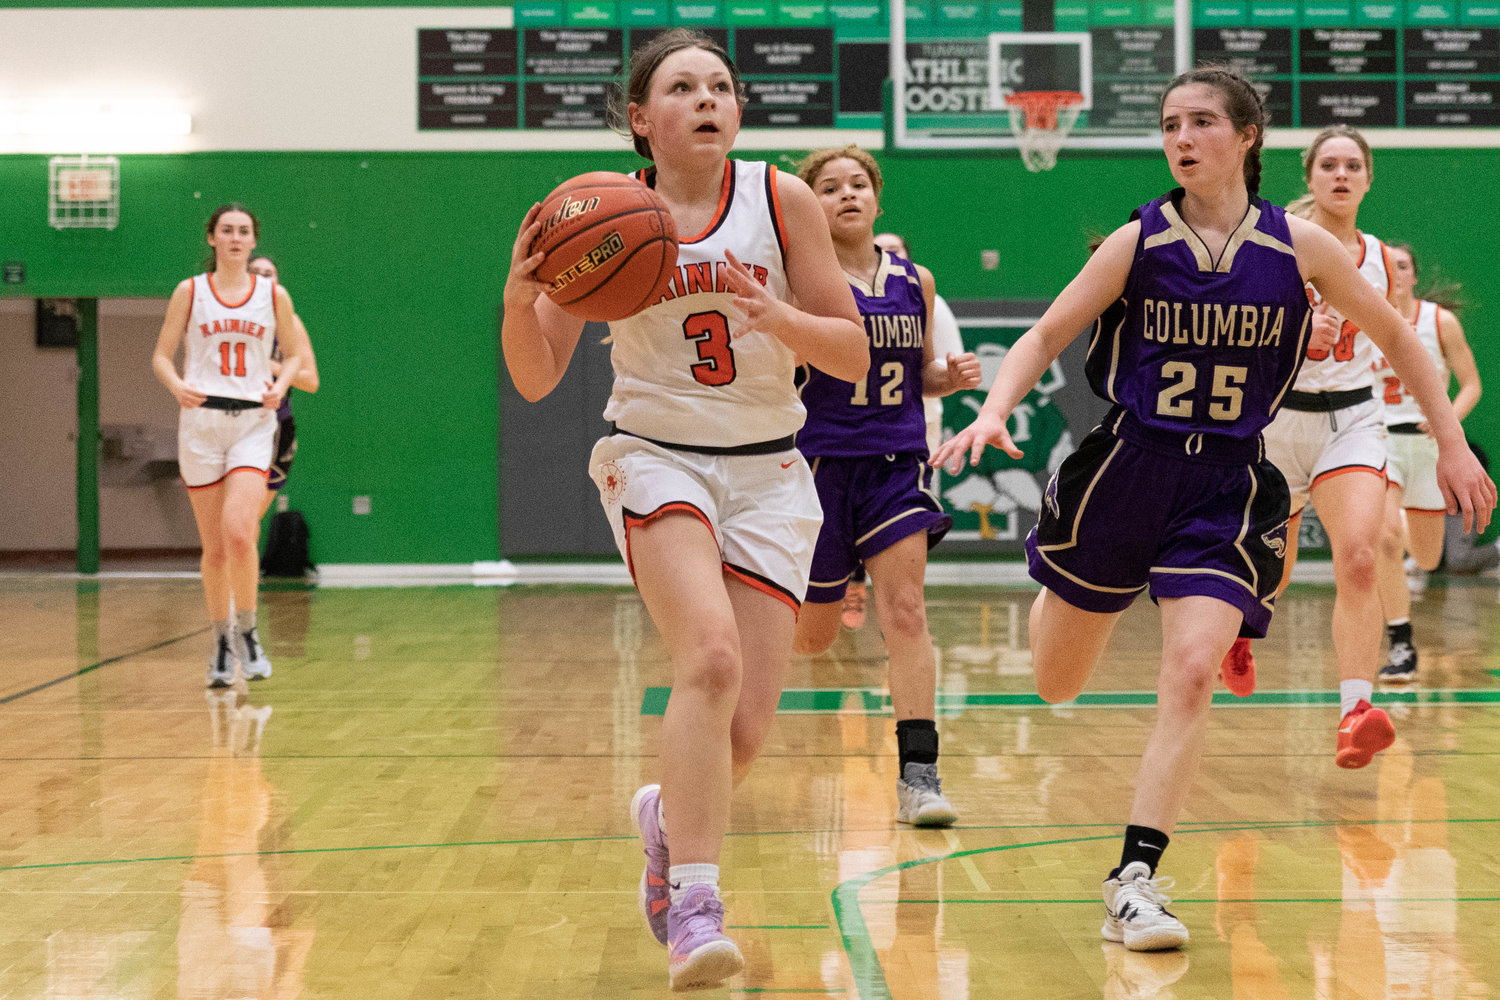 Rainier guard Brooklynn Swenson drives to the hoop against Columbia (Burbank) in the regional round of the state tournament at Tumwater Feb. 25.